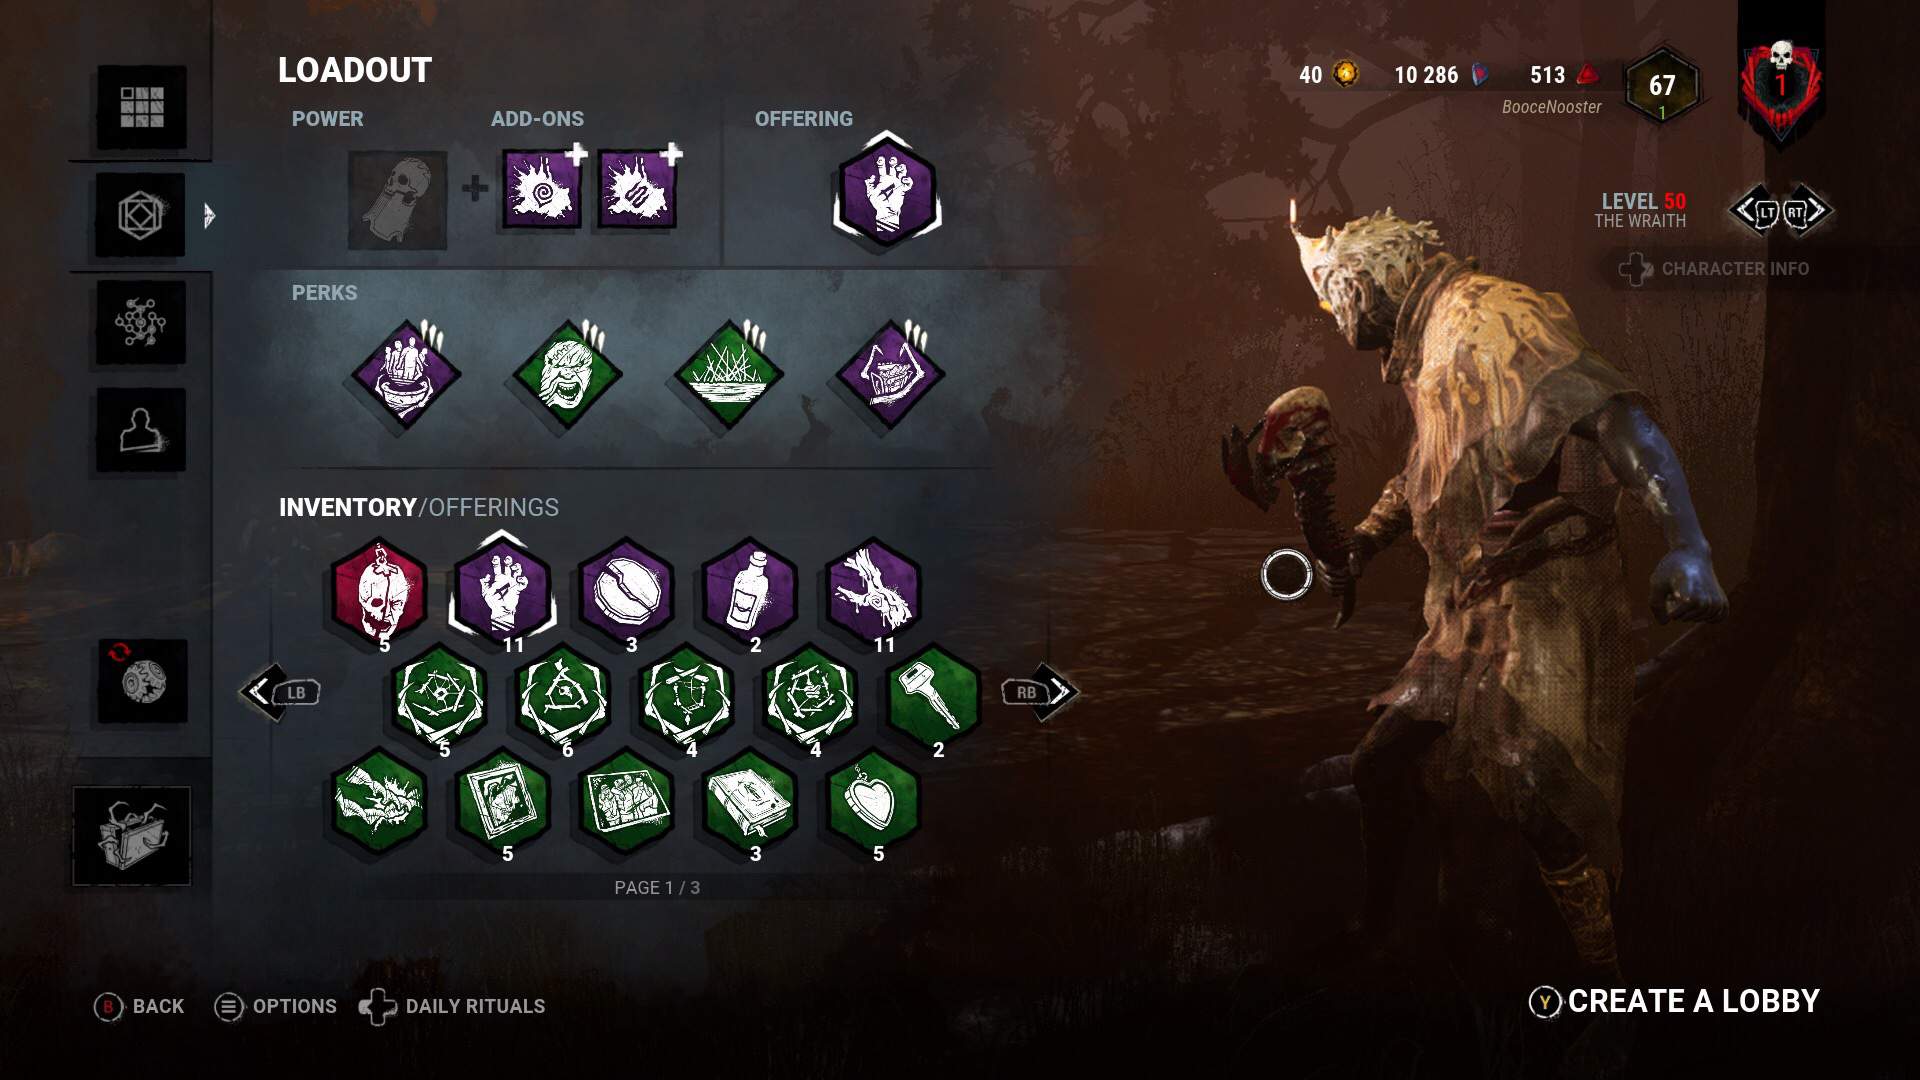 Wraith build scale of 110 Dead by Daylight (DBD) Amino